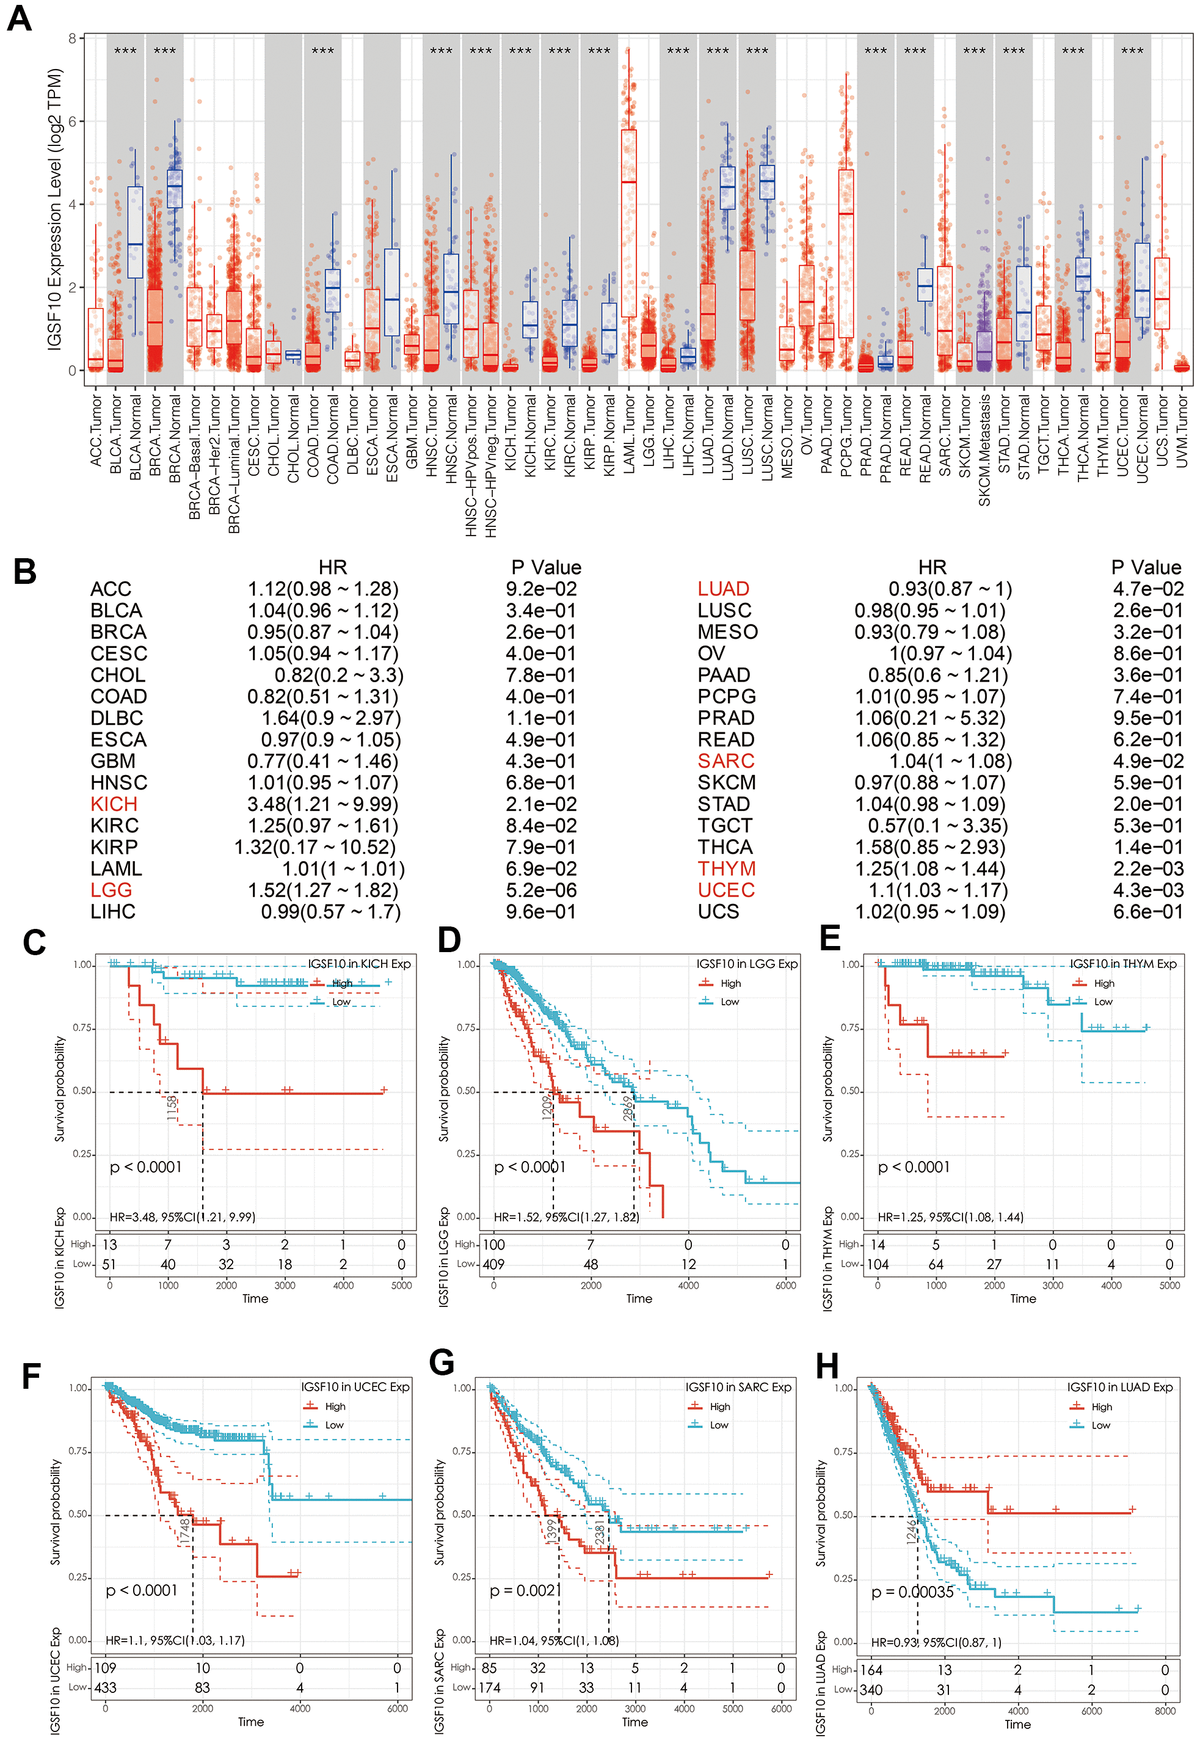 Prognostic significance of IGSF10 expression in pan-cancer tissues. (A) The expression levels of IGSF10 in pan-cancer and corresponding normal tissues from the TCGA database. (B–H) Survival curves show OS rates of high- and low-IGSF10 expressing tumor tissues from various TCGA pan-cancer datasets.